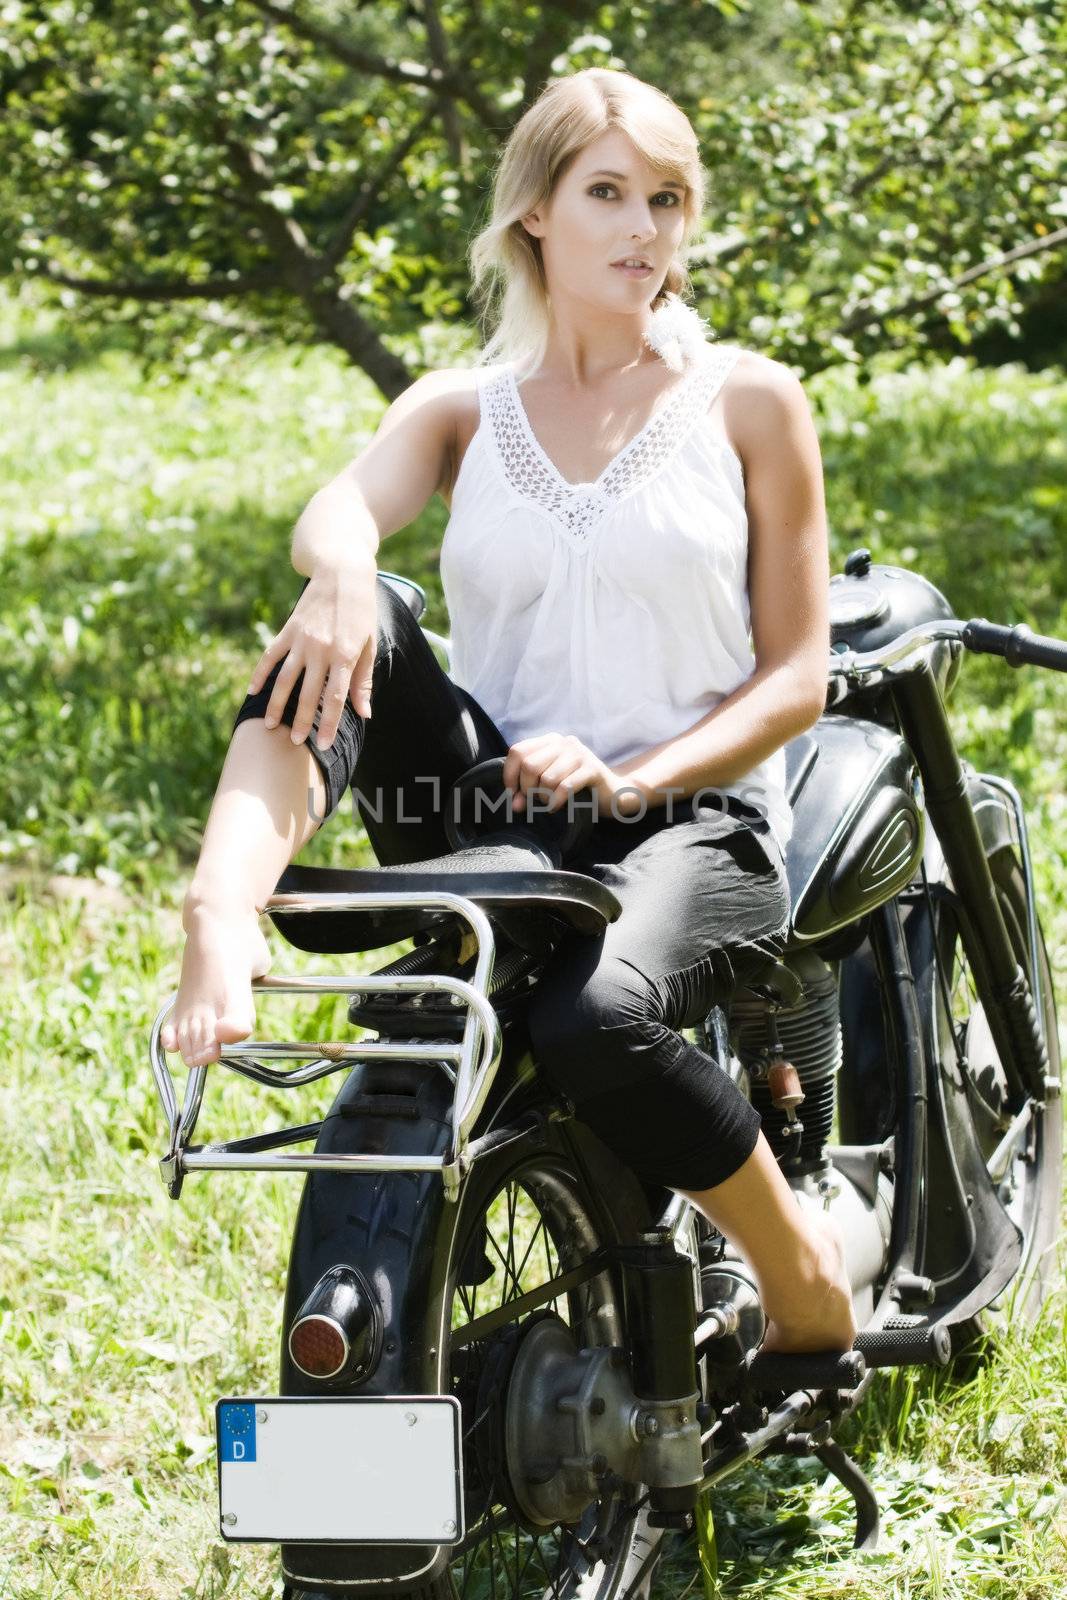 Fashionably dressed woman seated on an old motorcycle